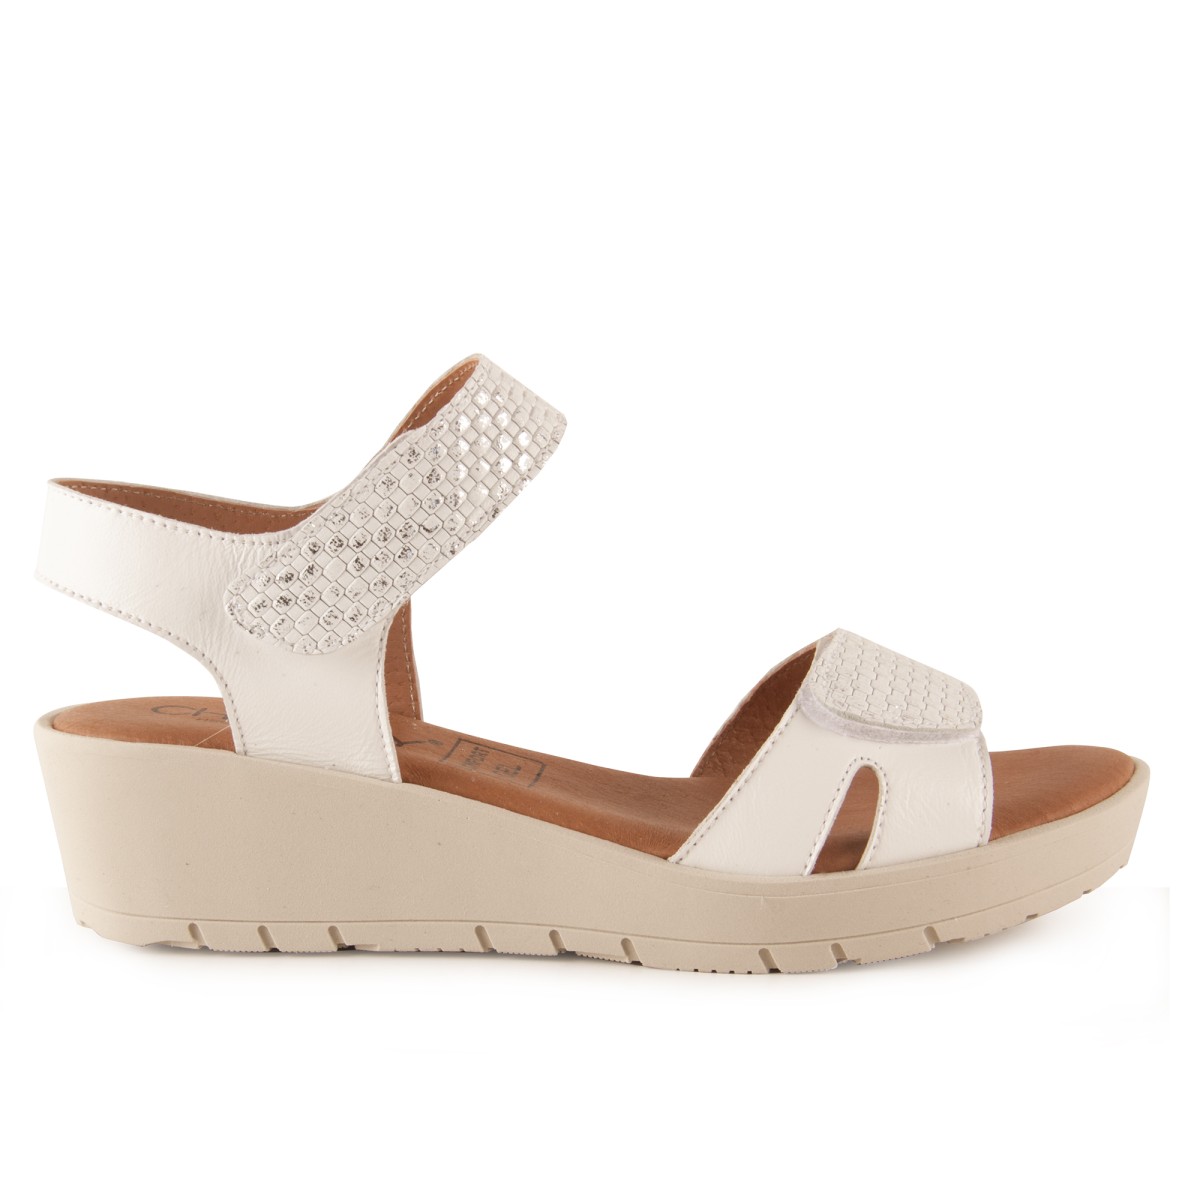 White leather sandals by Chamby